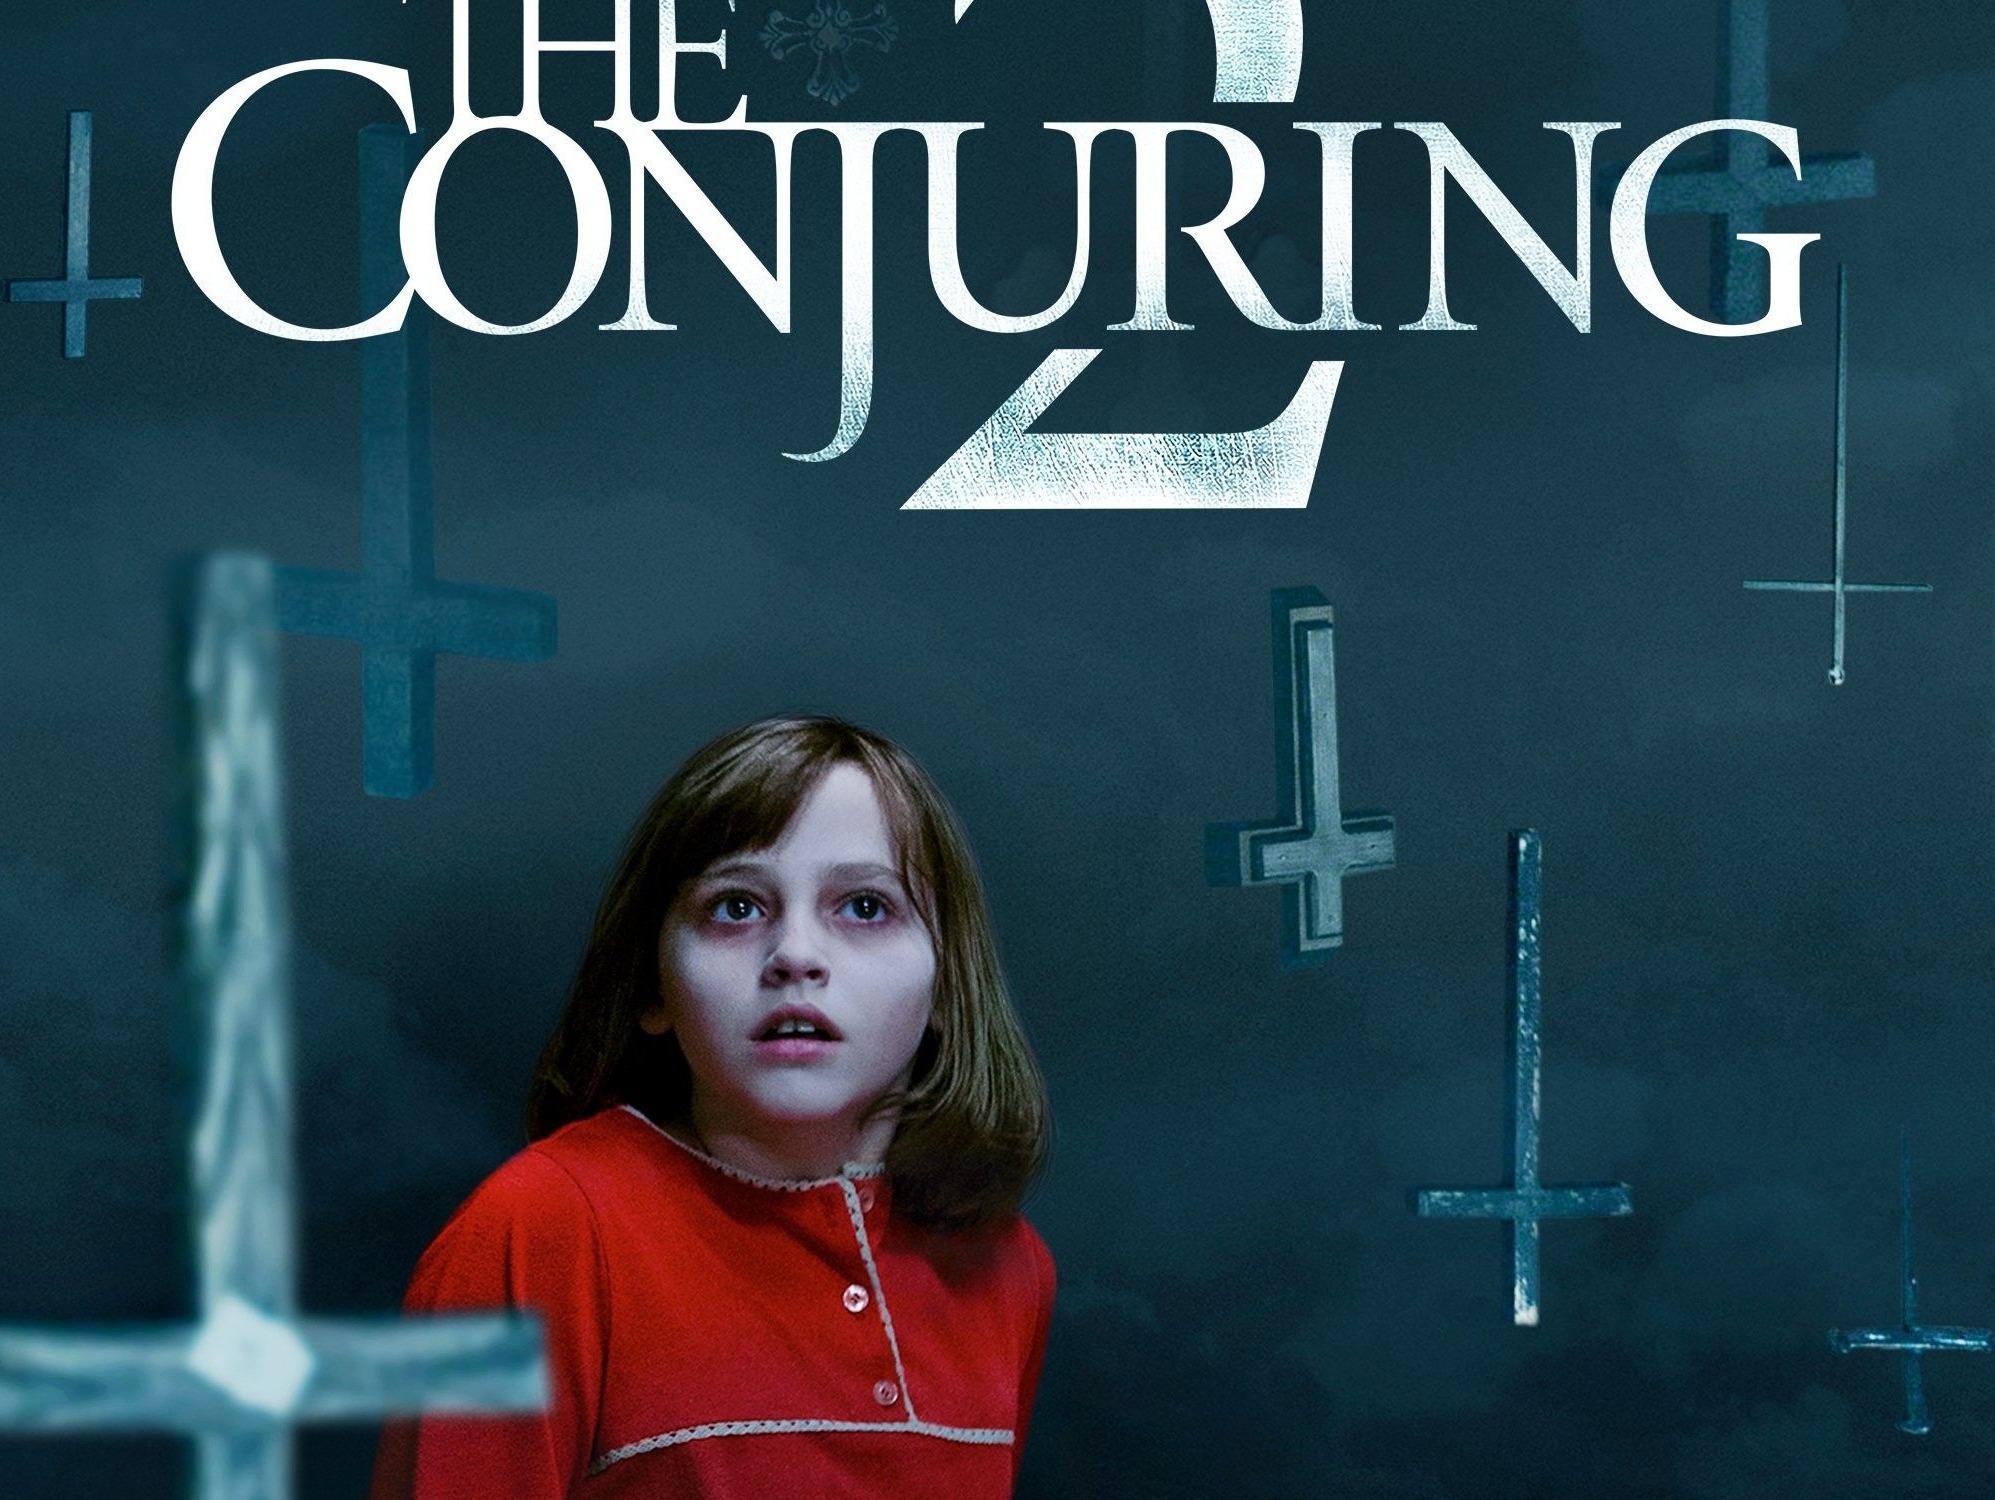 Conjuring мод на майнкрафт. The Conjuring with Subtitles. Conjuring перевод